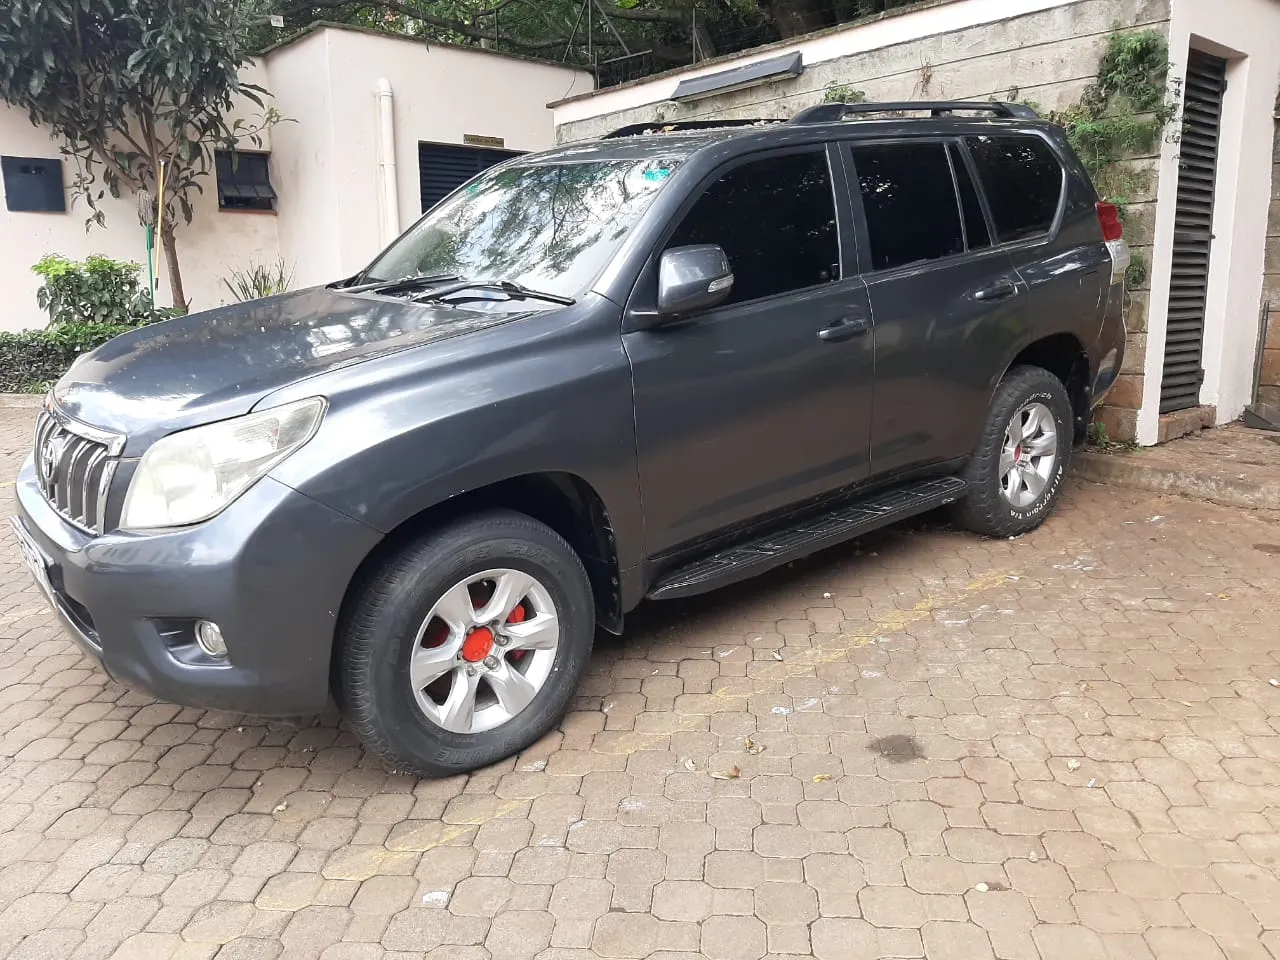 Cars Cars For Sale/Vehicles-Toyota Prado 2011 LOCAL MANUAL DIESEL SUNROOF 1.9M Only! You Pay 30% Deposit Trade in OK 6